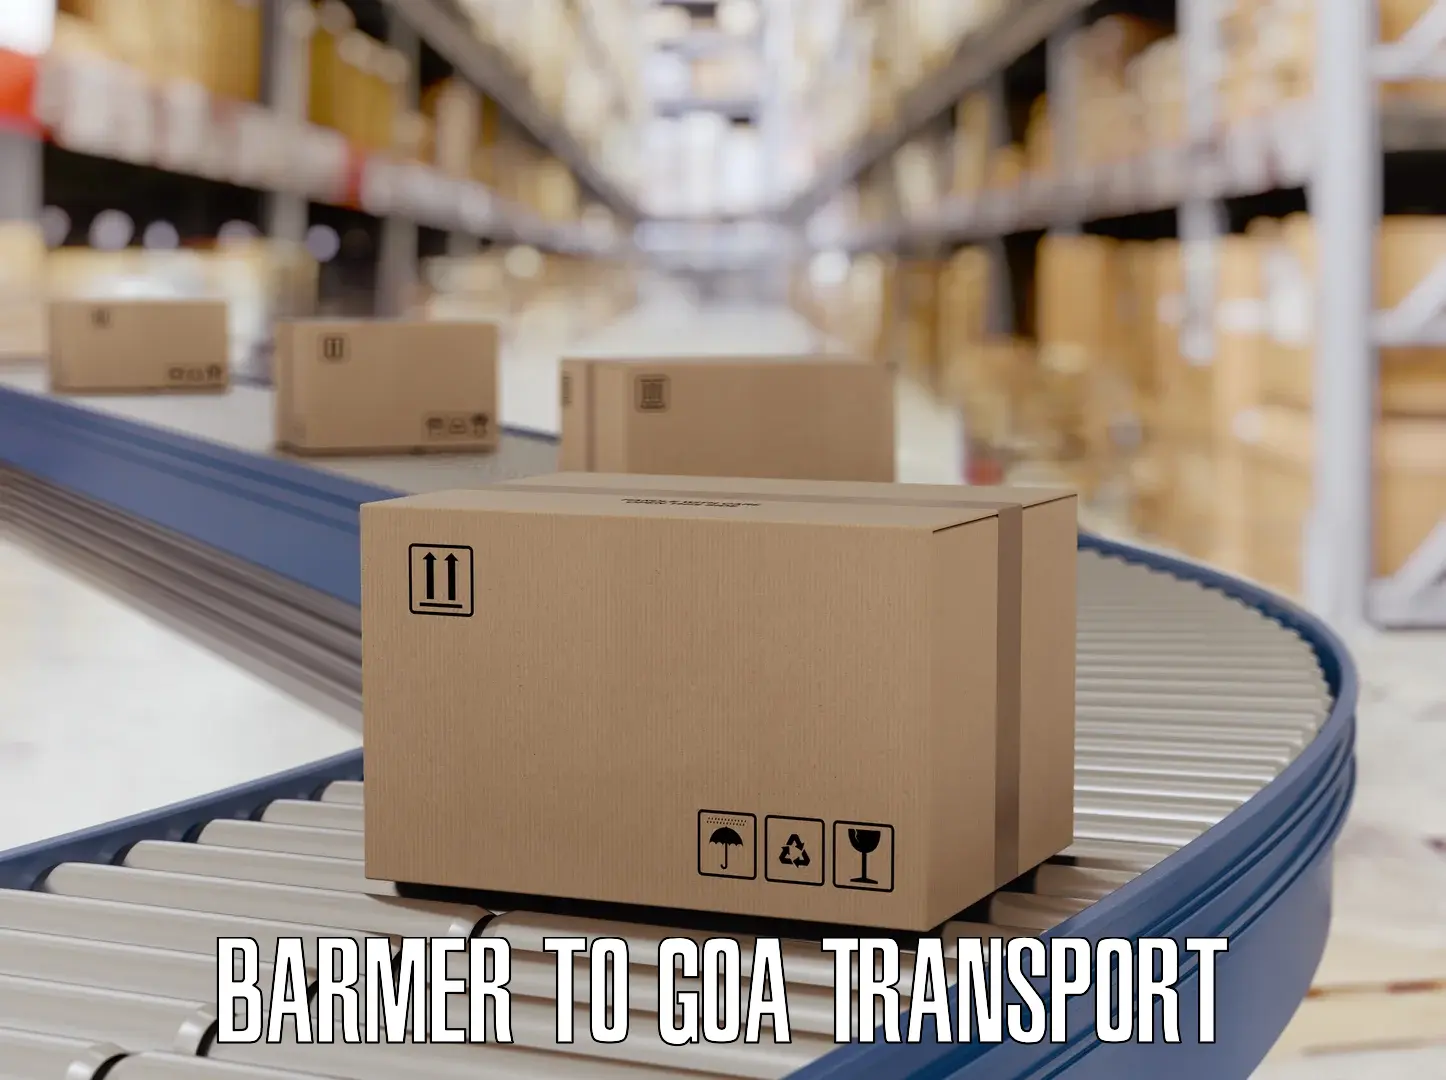 Nationwide transport services Barmer to Bardez